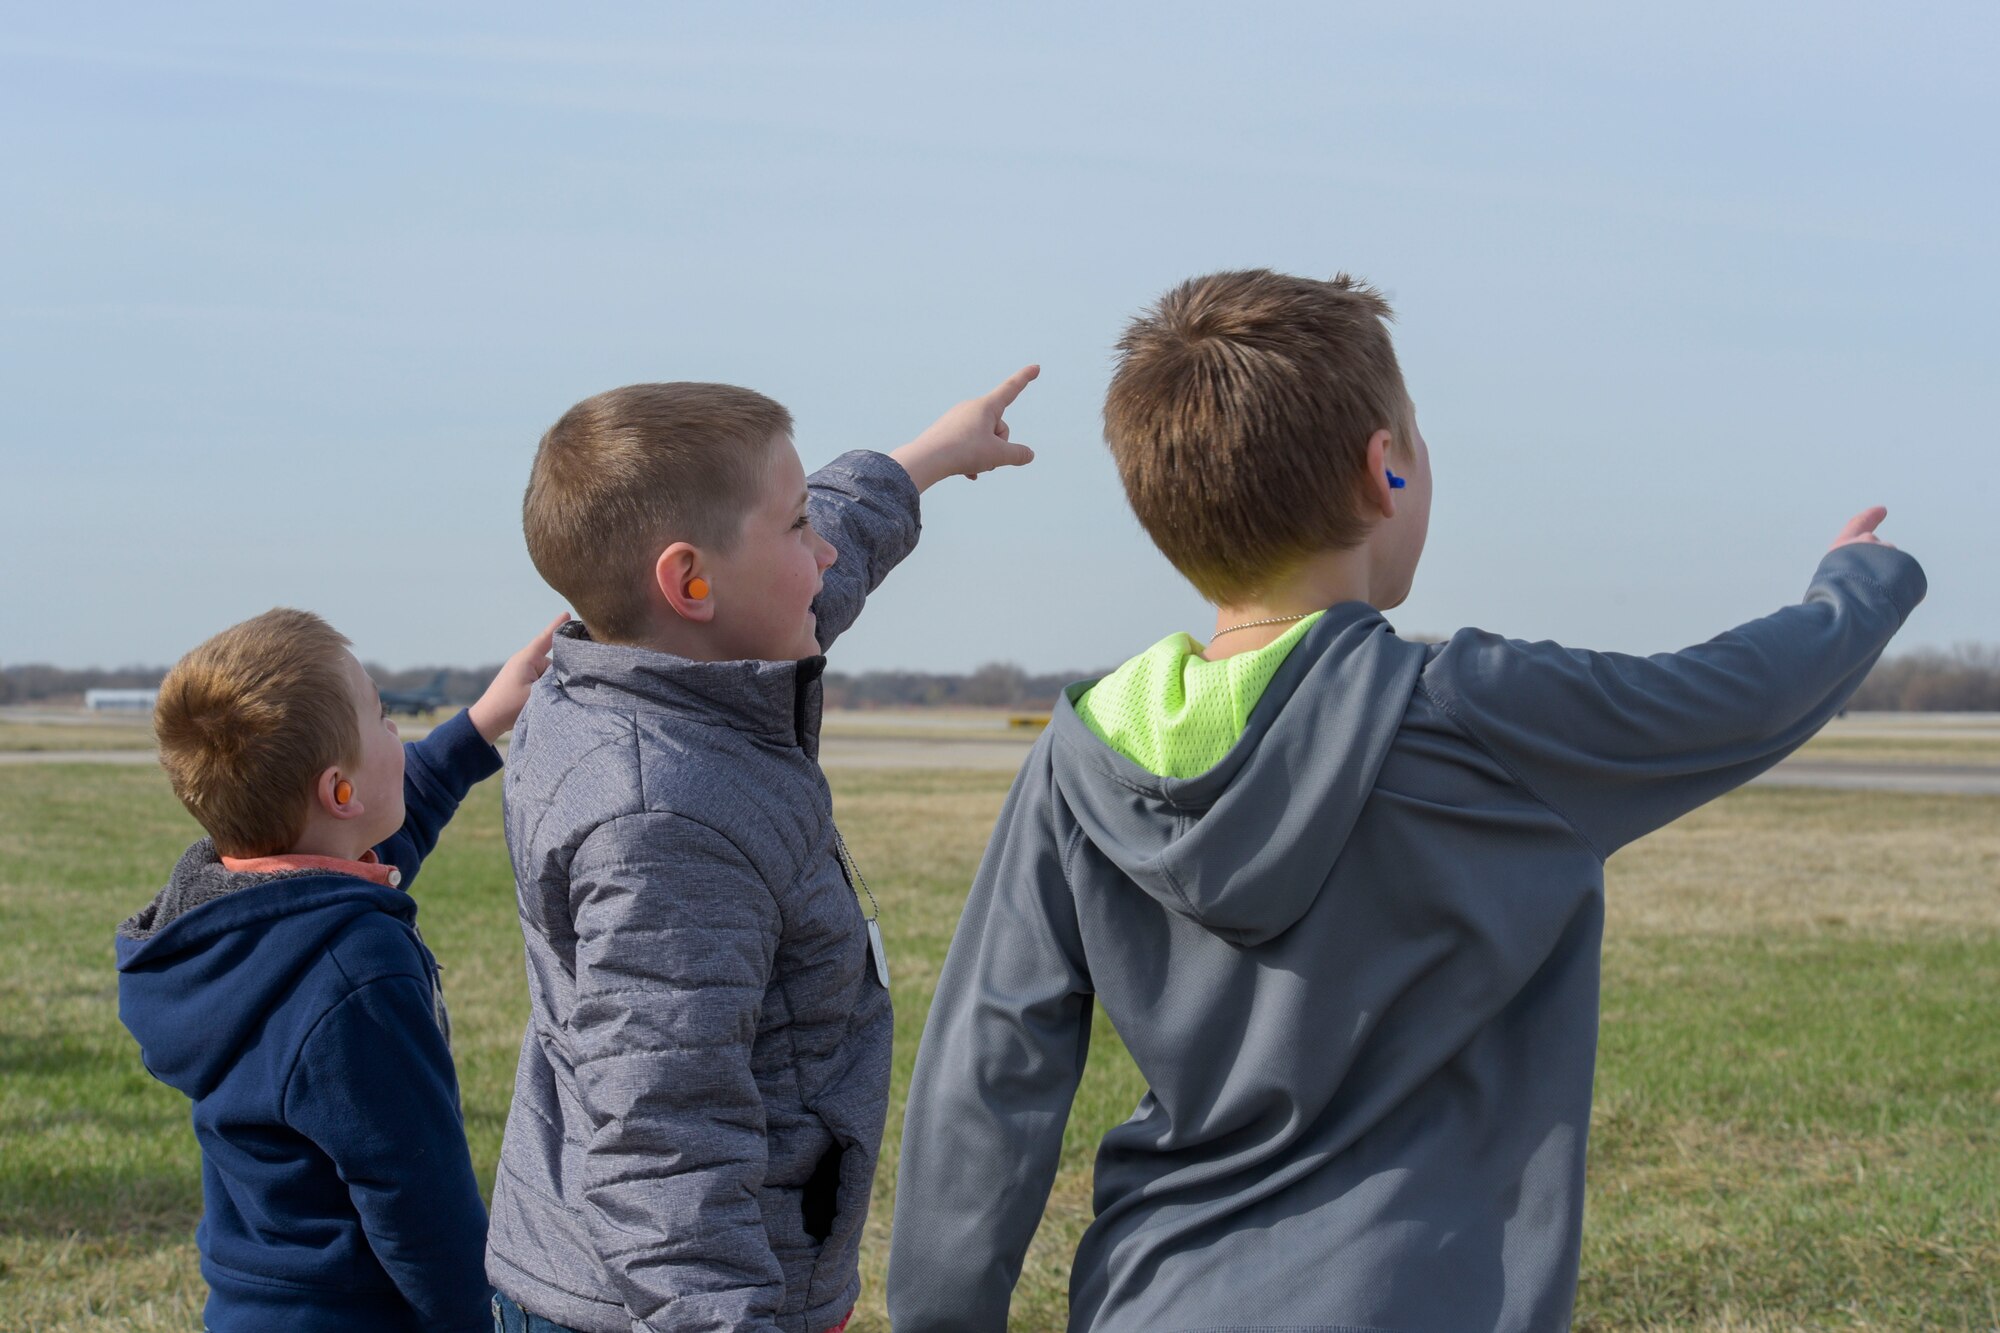 Charlie Nelson, 4, Mason Amoriello, 7, and Carter Coenen, 6, watch an F-16 Fighting Falcon takeoff at Truax Field, Wis. April 26, 2018. The takeoff was one of the many things children were able to participate in during National Take Our Sons and Daughters to Work Day.
(U.S. Air National Guard photo by Cameron R. Lewis)